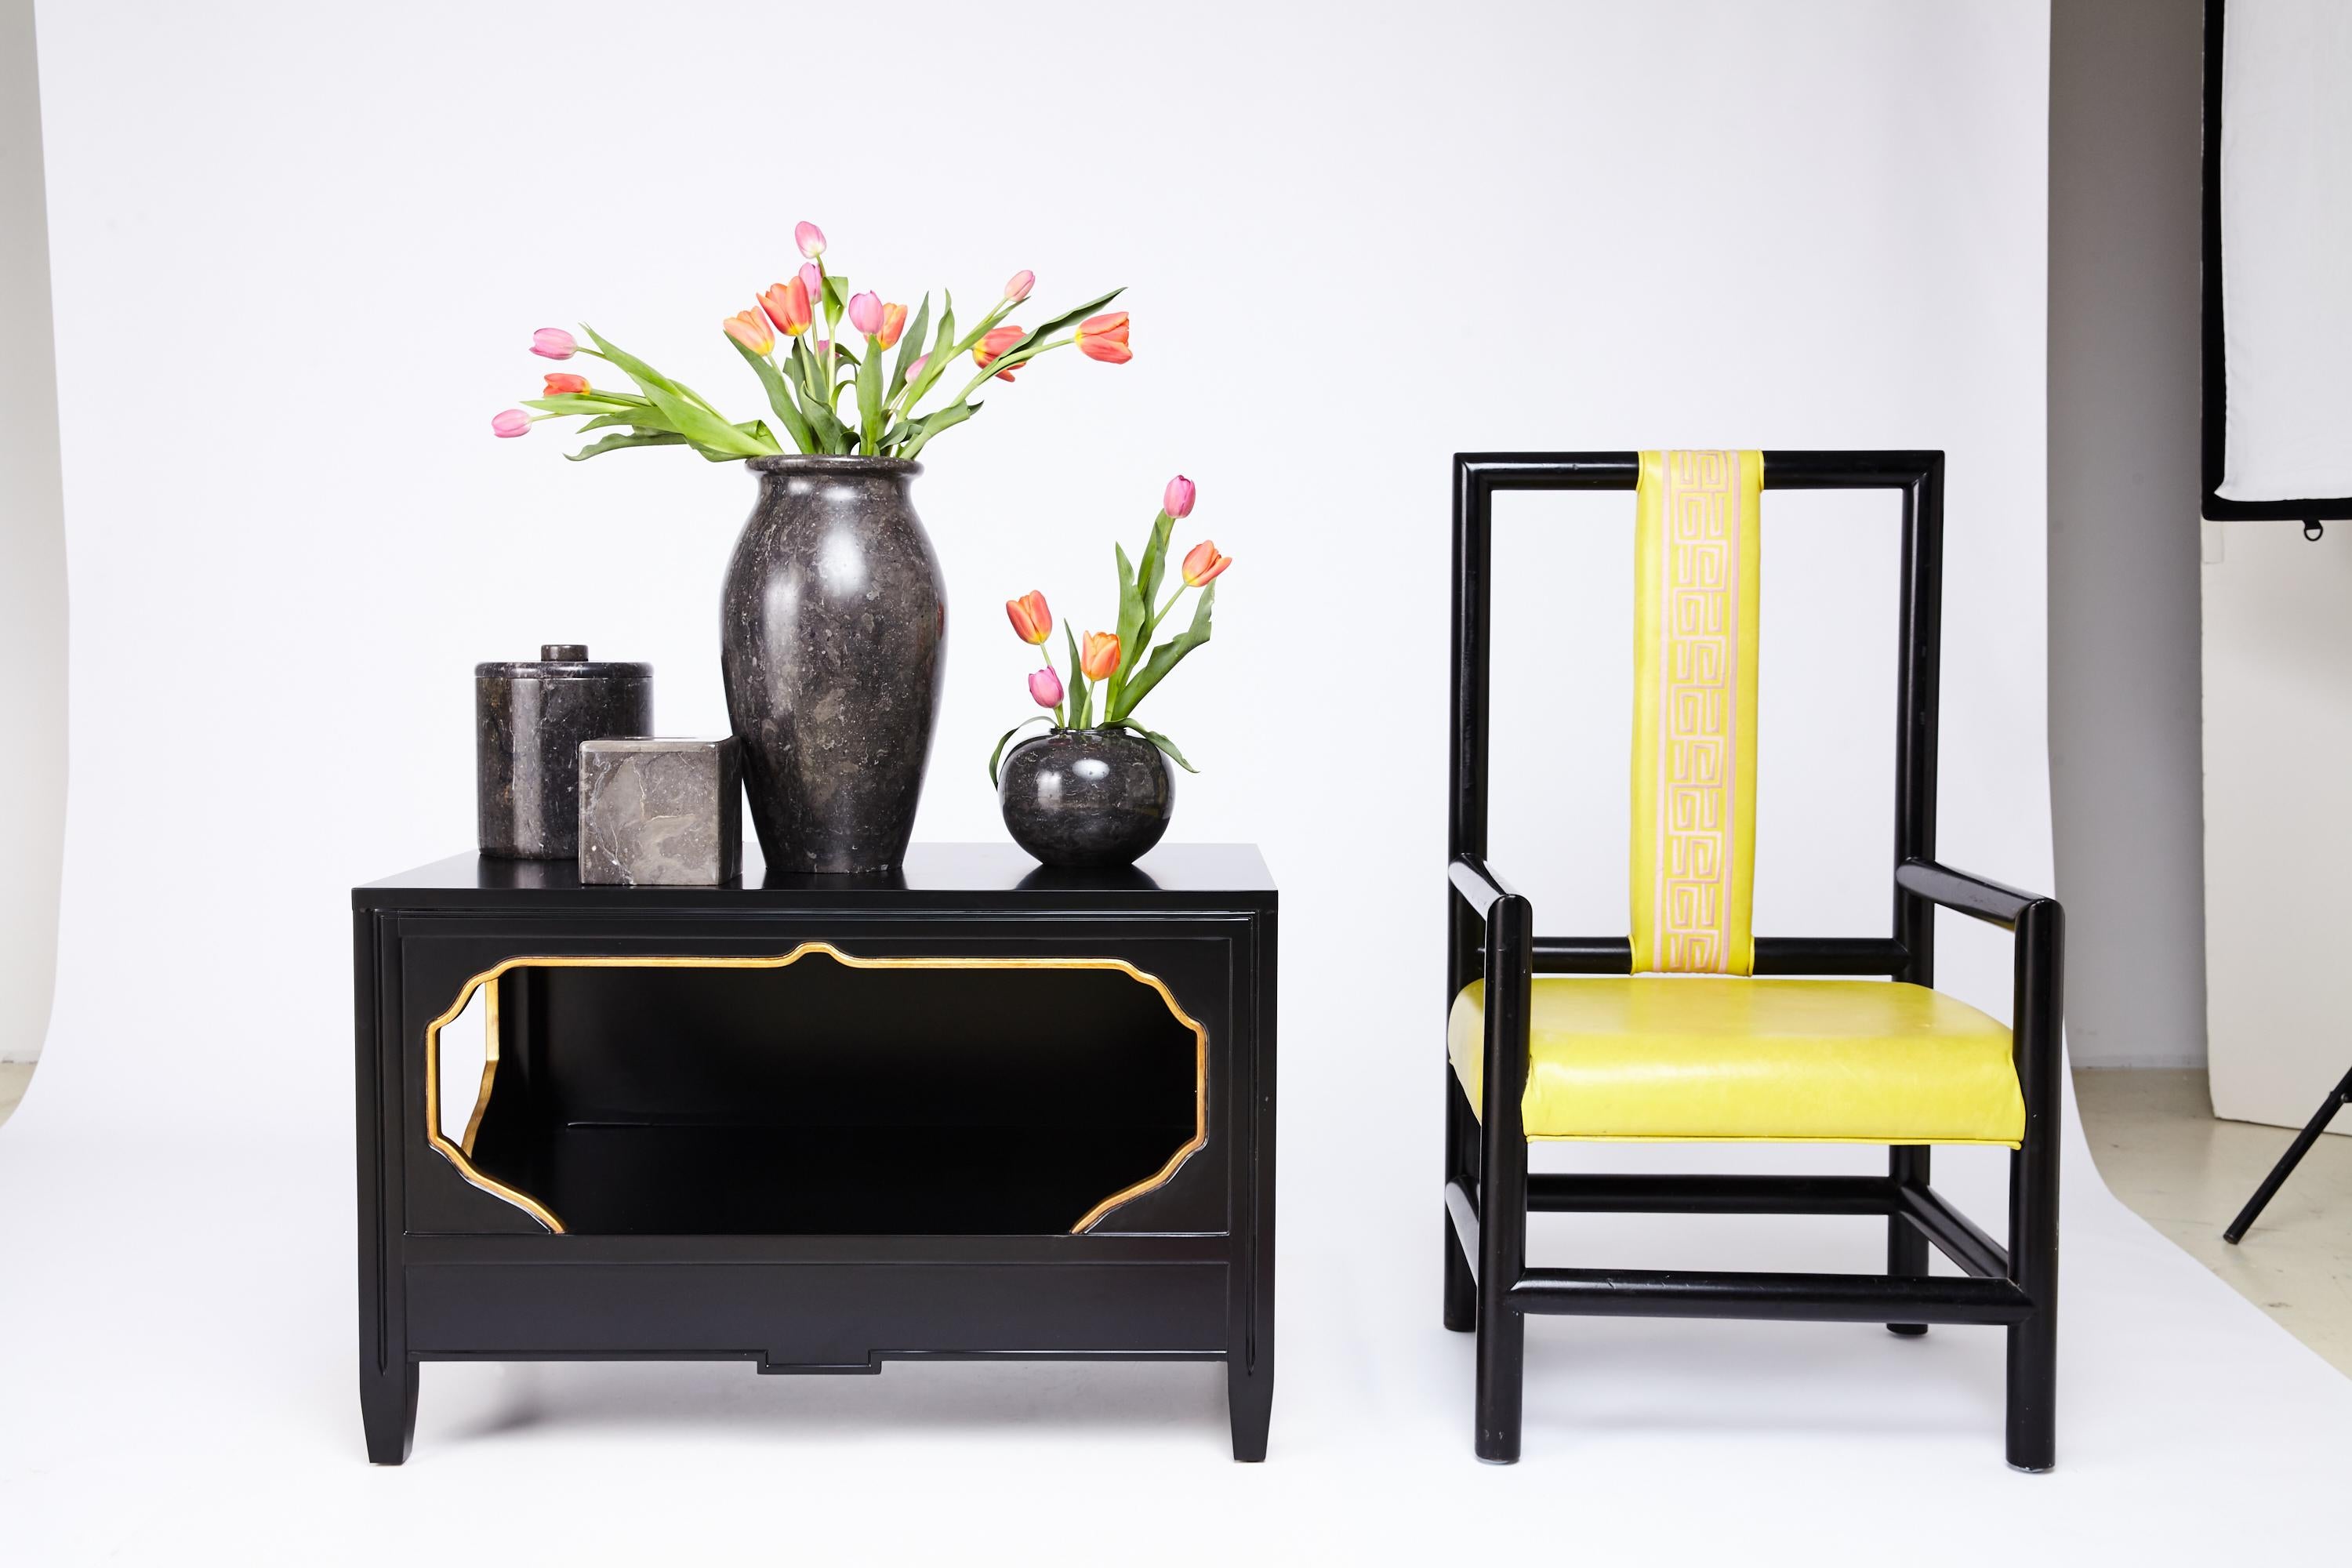 Lacquer Pair of High Back Armchair by Kelly Wearstler for the Viceroy Hotel